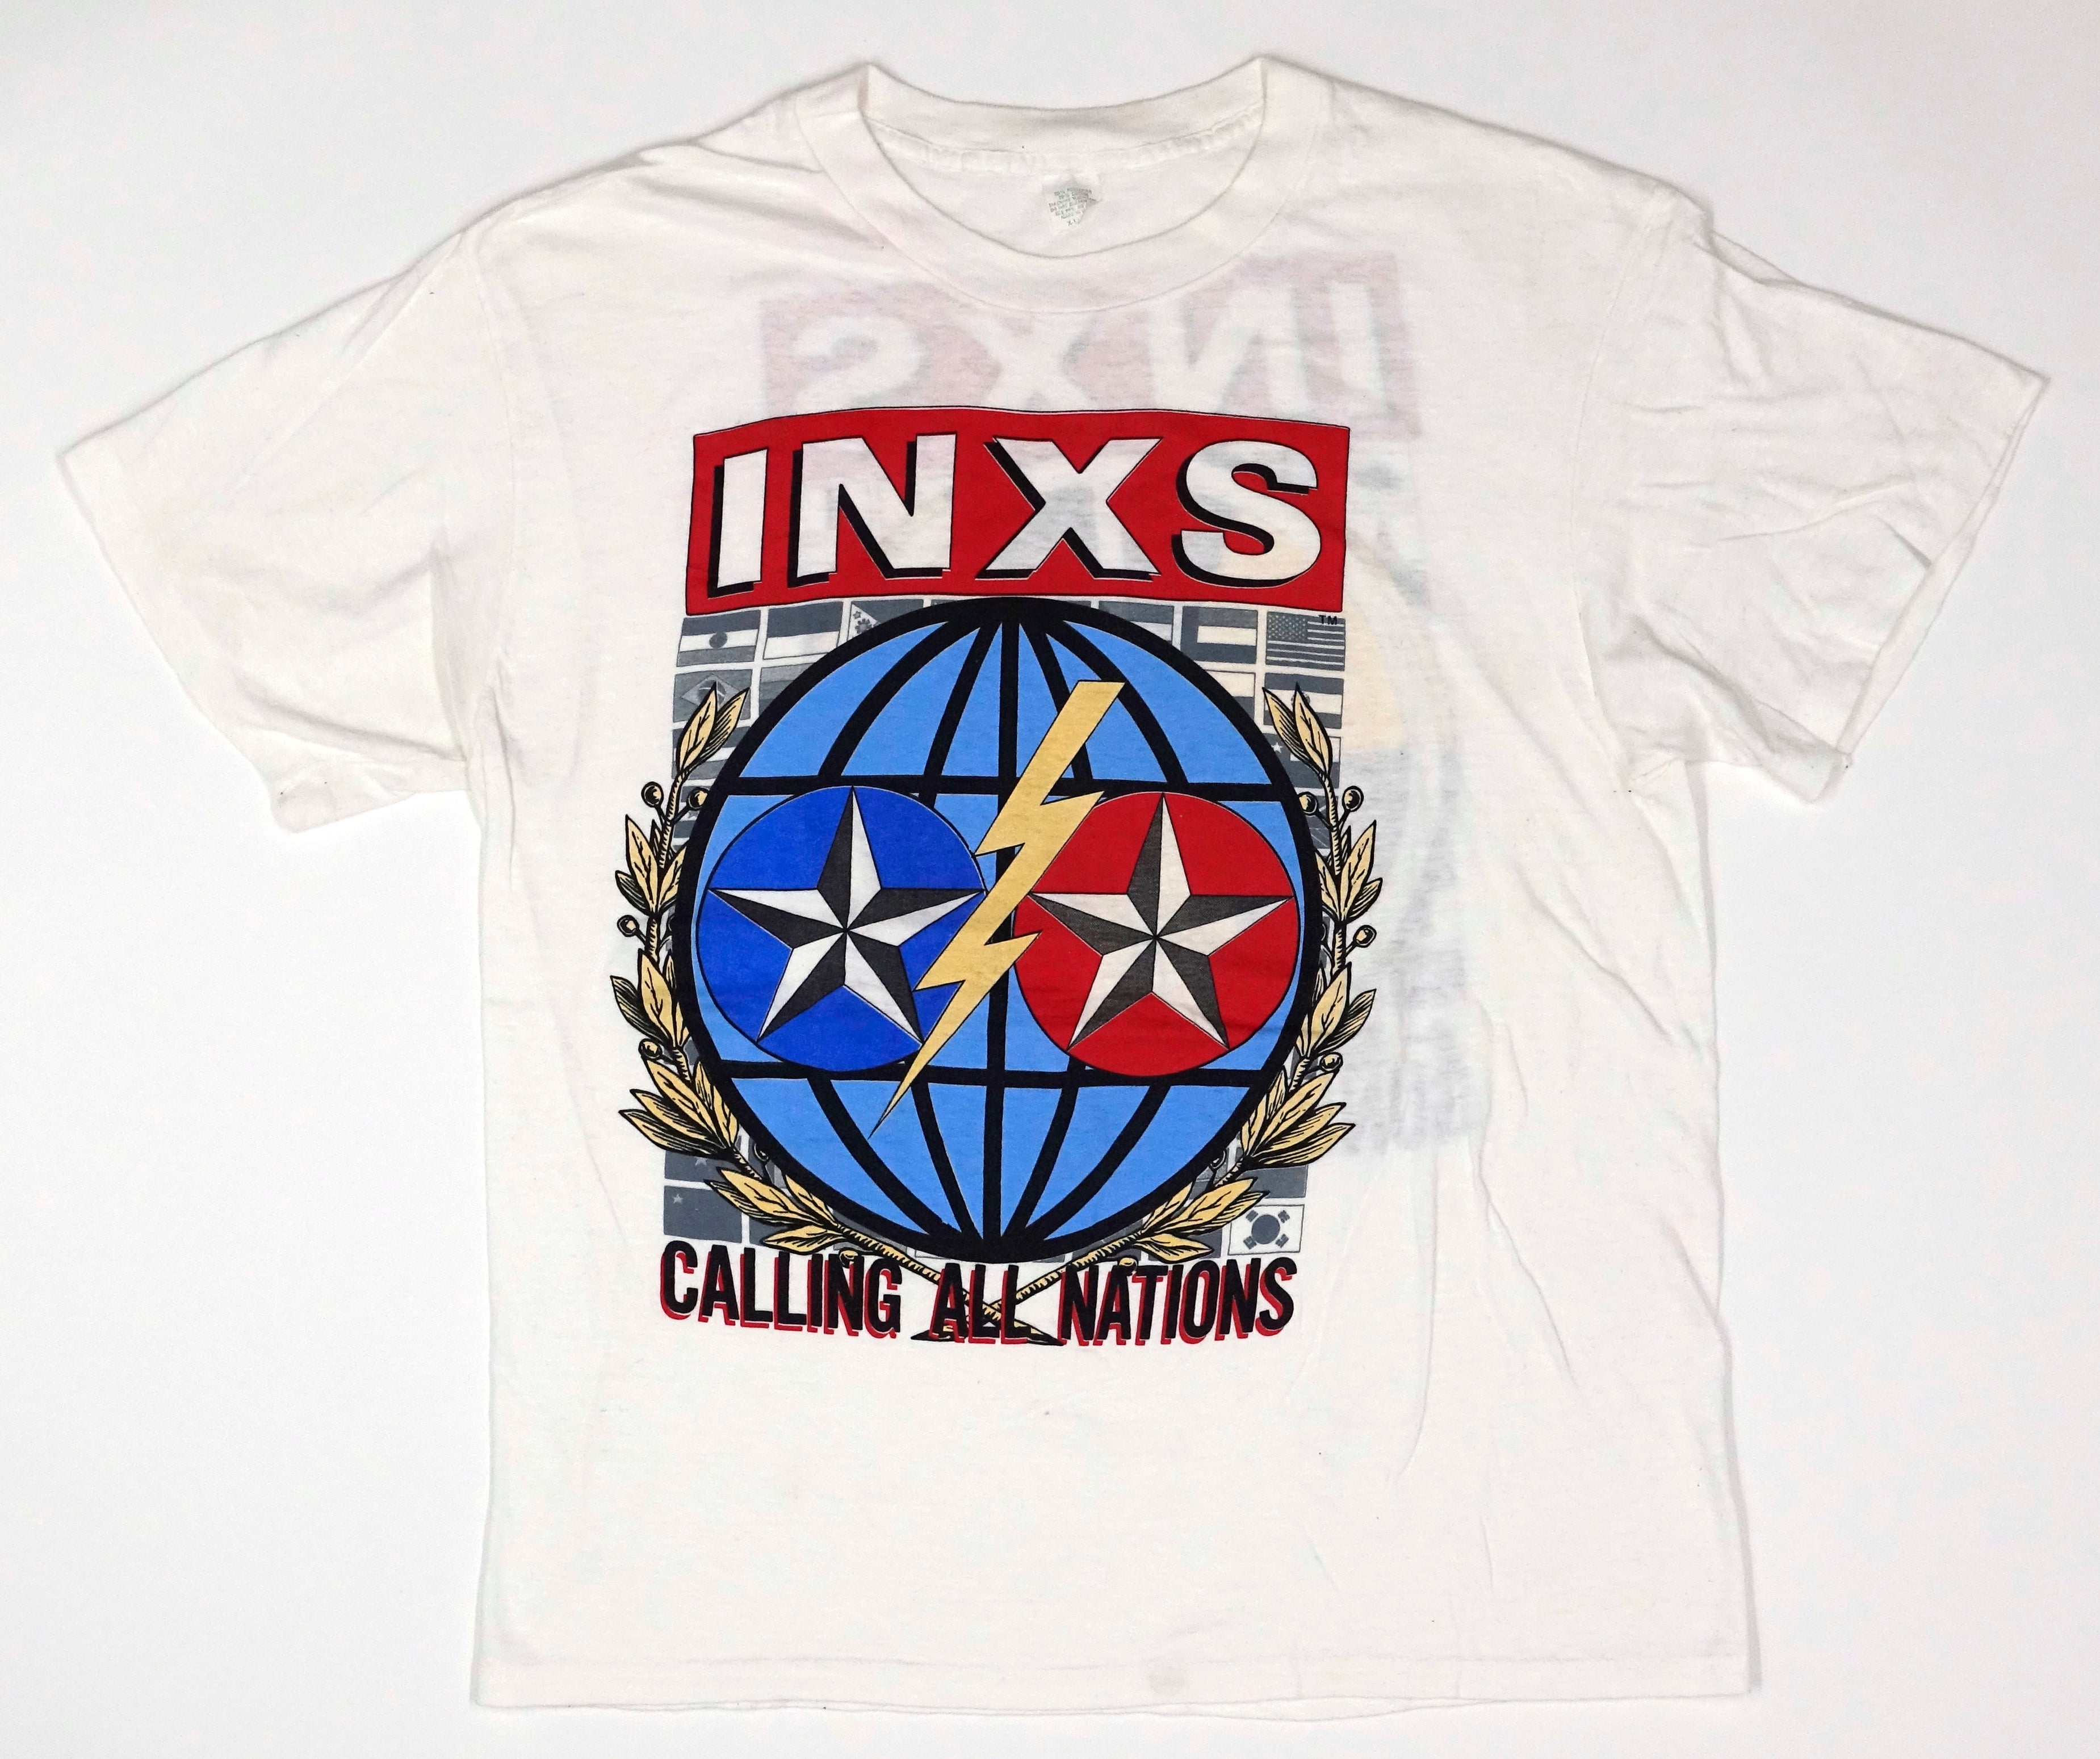 INXS - Calling All Nations Guns in The Sky World 1988 Tour Shirt Size XL